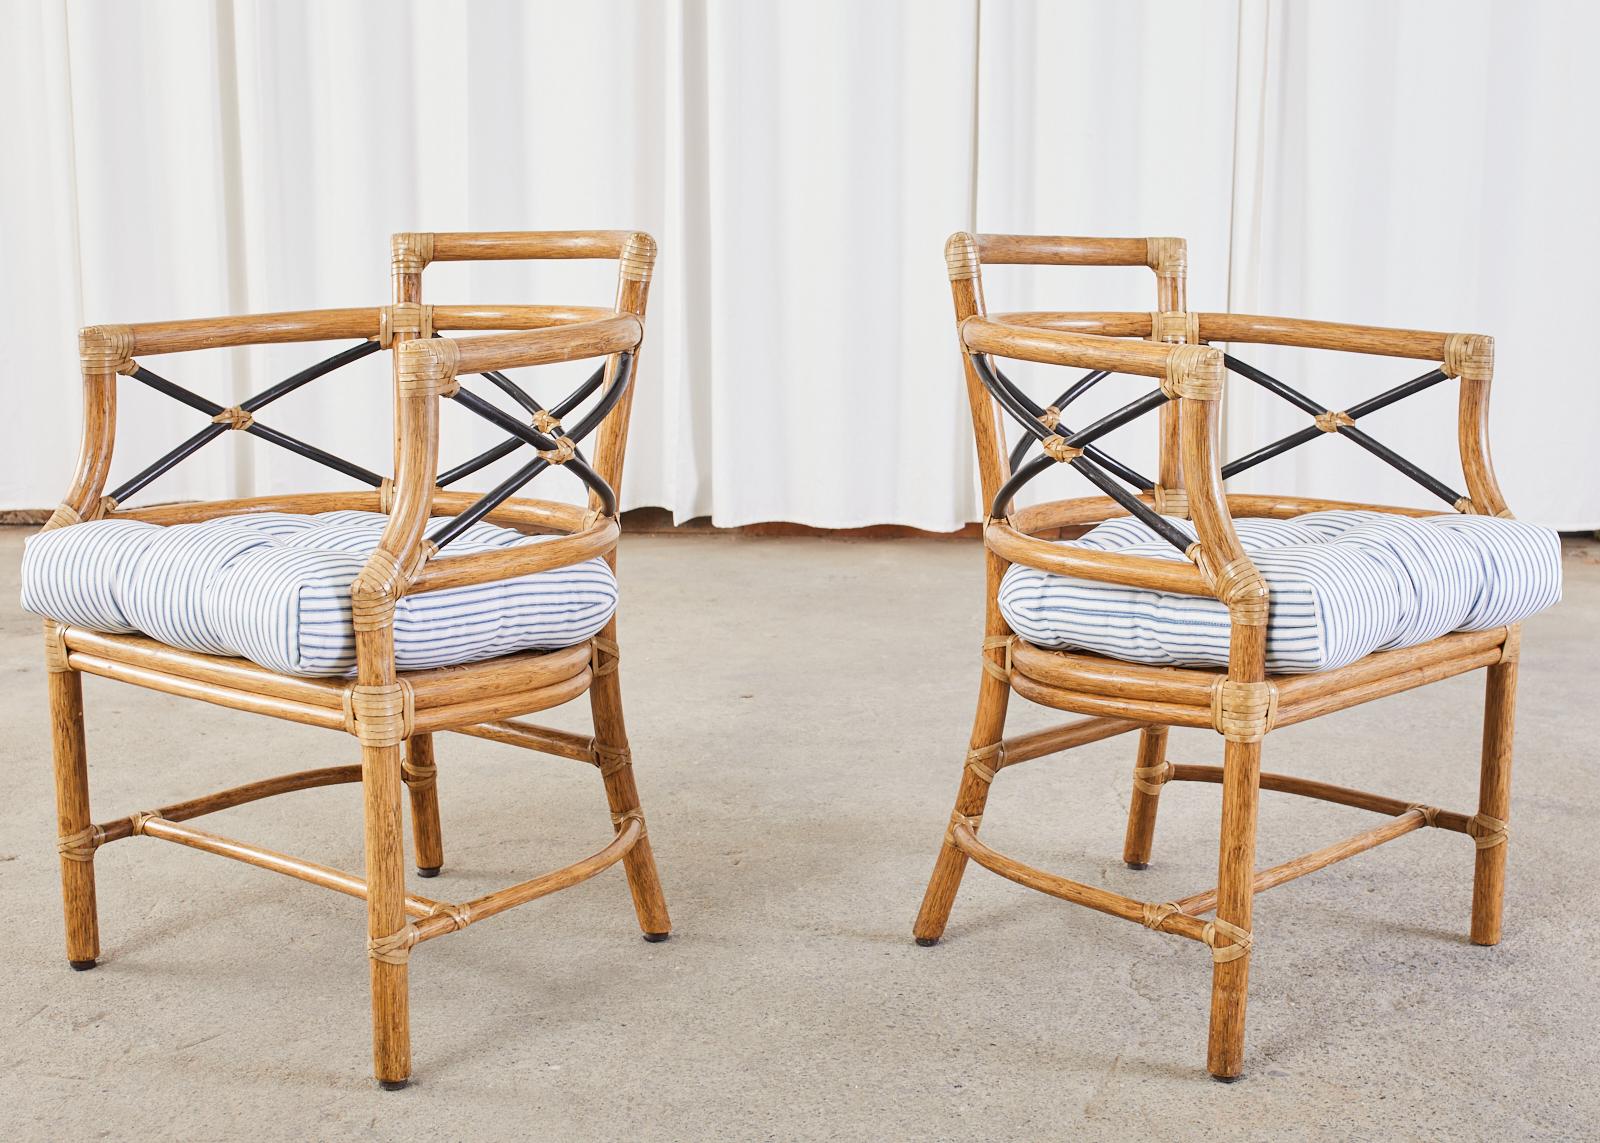 Stylish pair of rattan barrel back dining armchairs designed by Elinor McGuire in the California organic modern style. The armchairs feature a curved bentwood rattan frame with an X form motif having an ebonized finish. The seat measures 16 inches